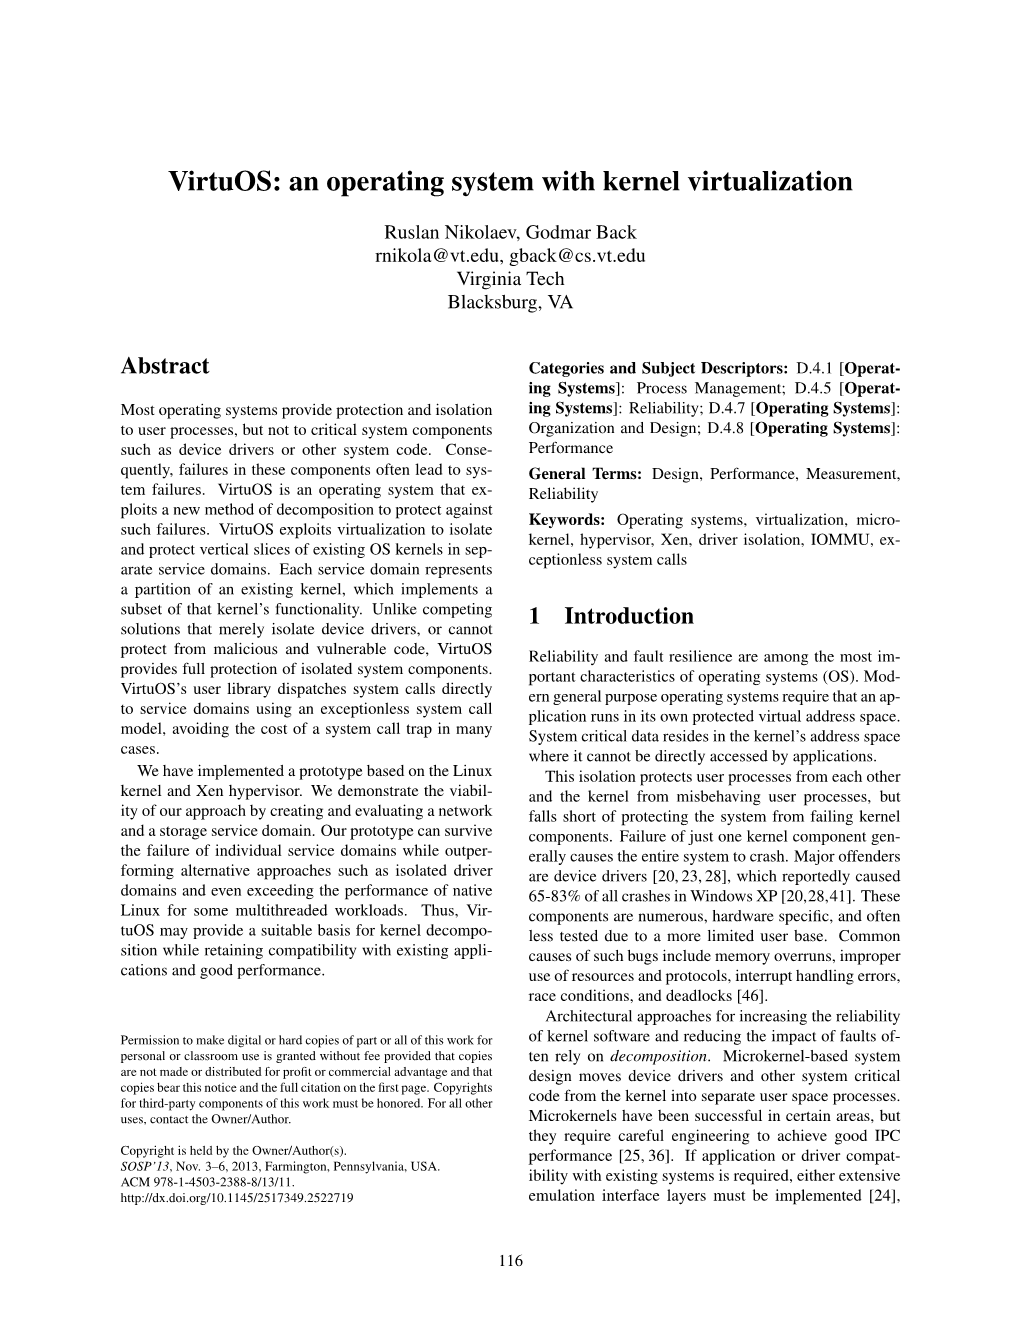 Virtuos: an Operating System with Kernel Virtualization